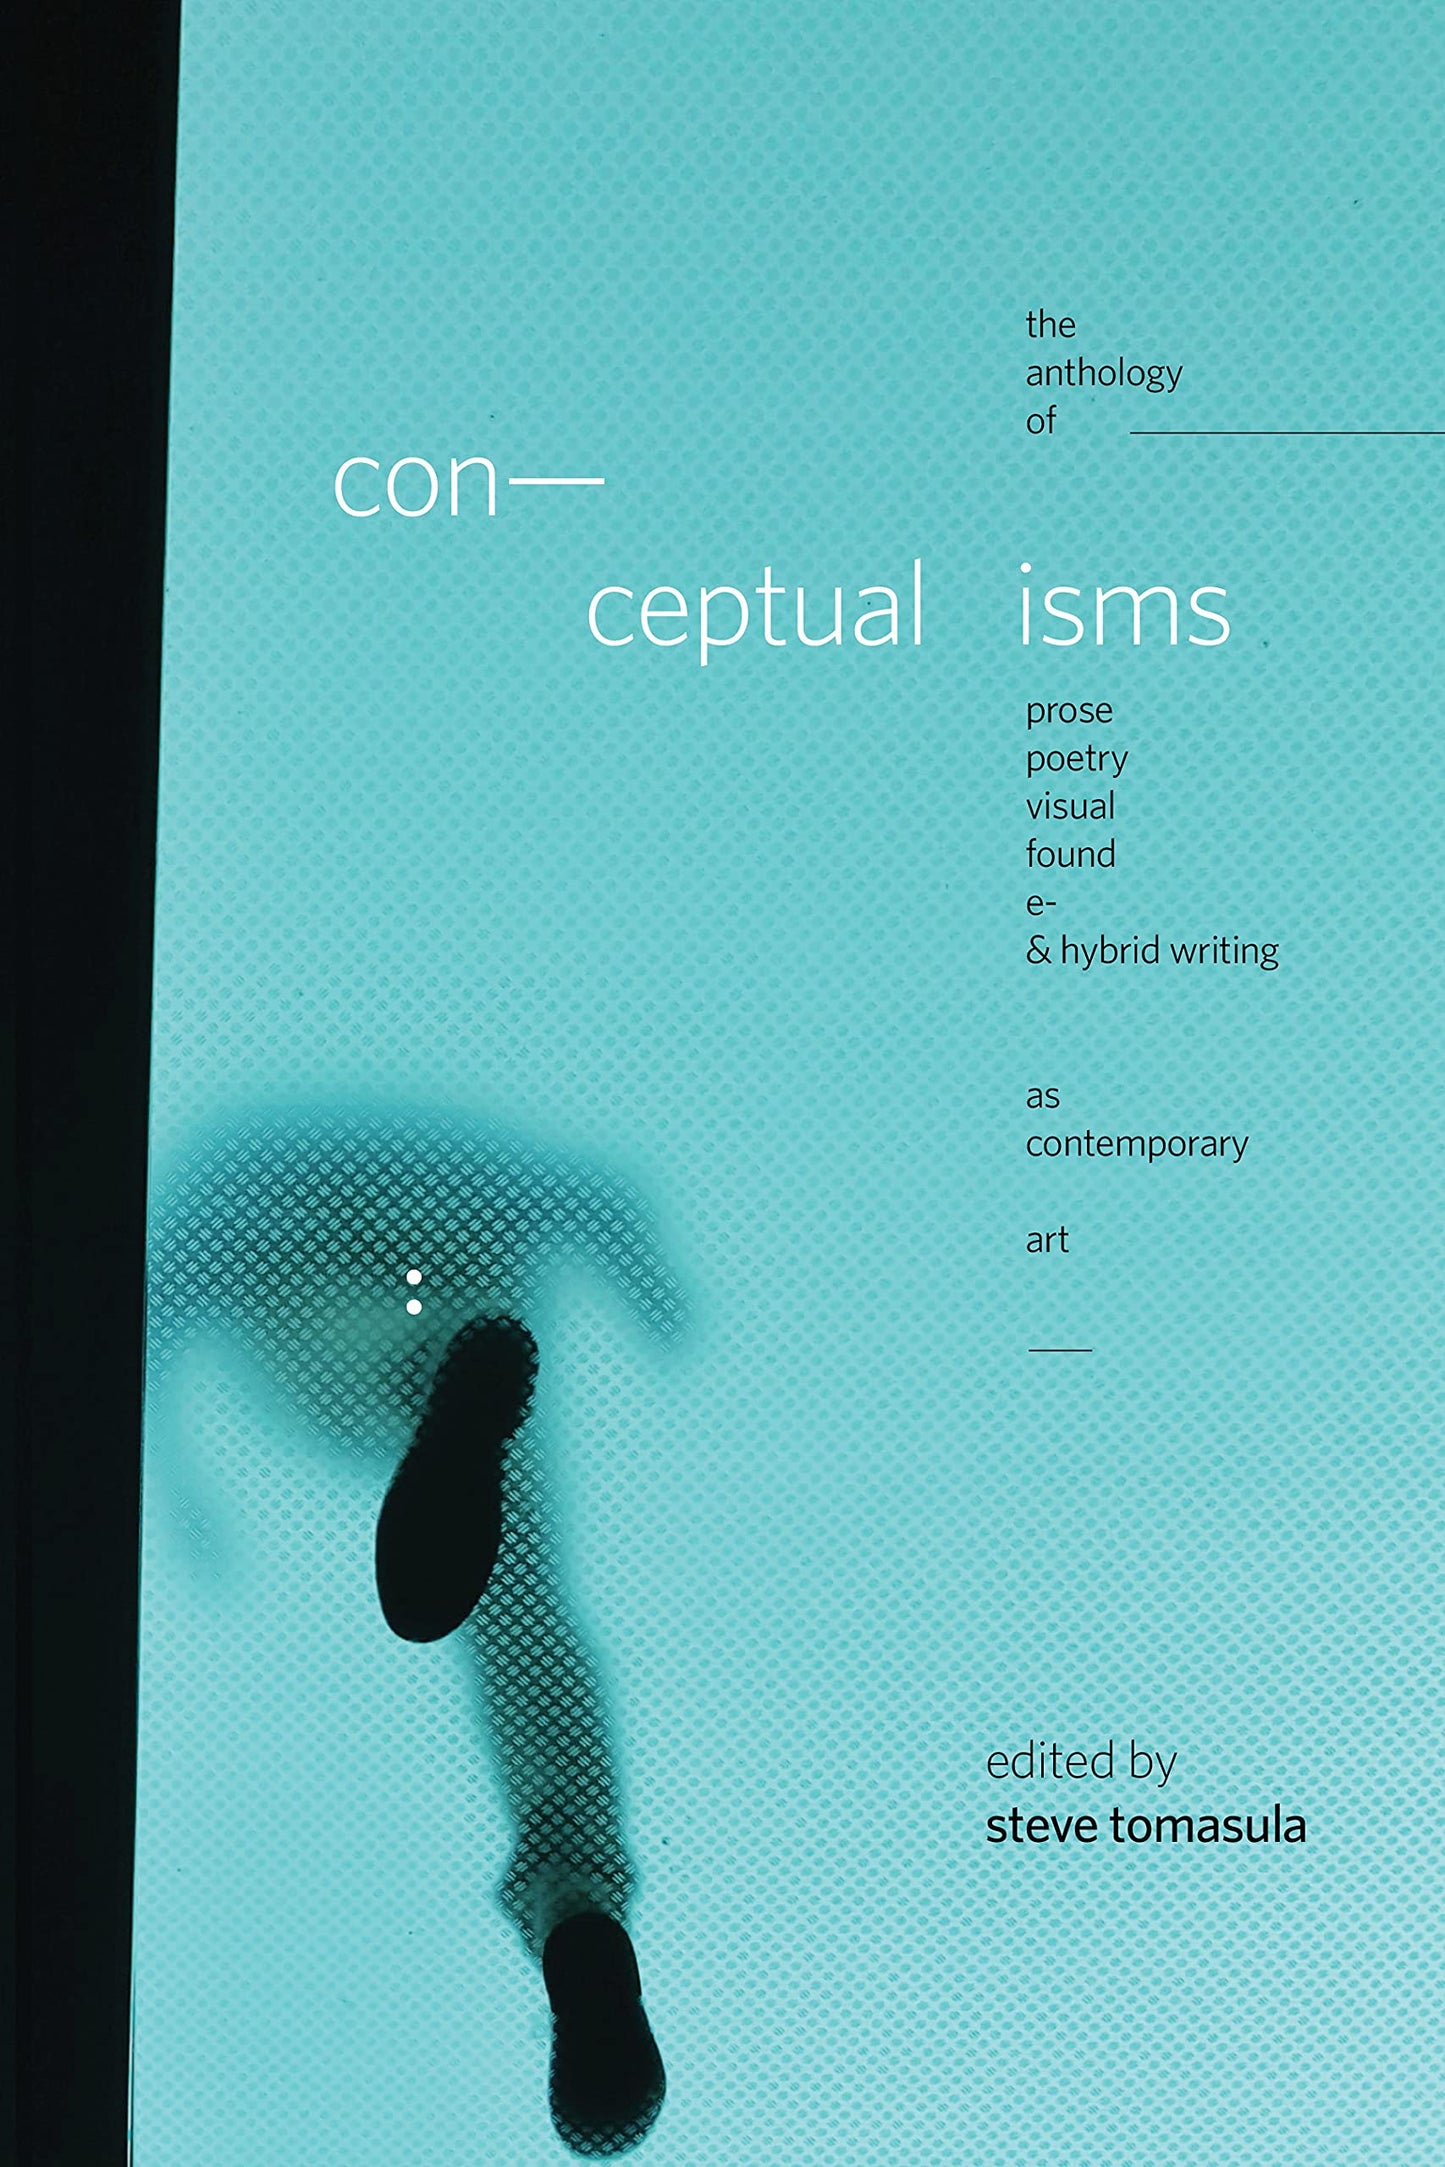 Conceptualisms: The Anthology of Prose, Poetry, Visual, Found, E- & Hybrid Writing as Contemporary Art